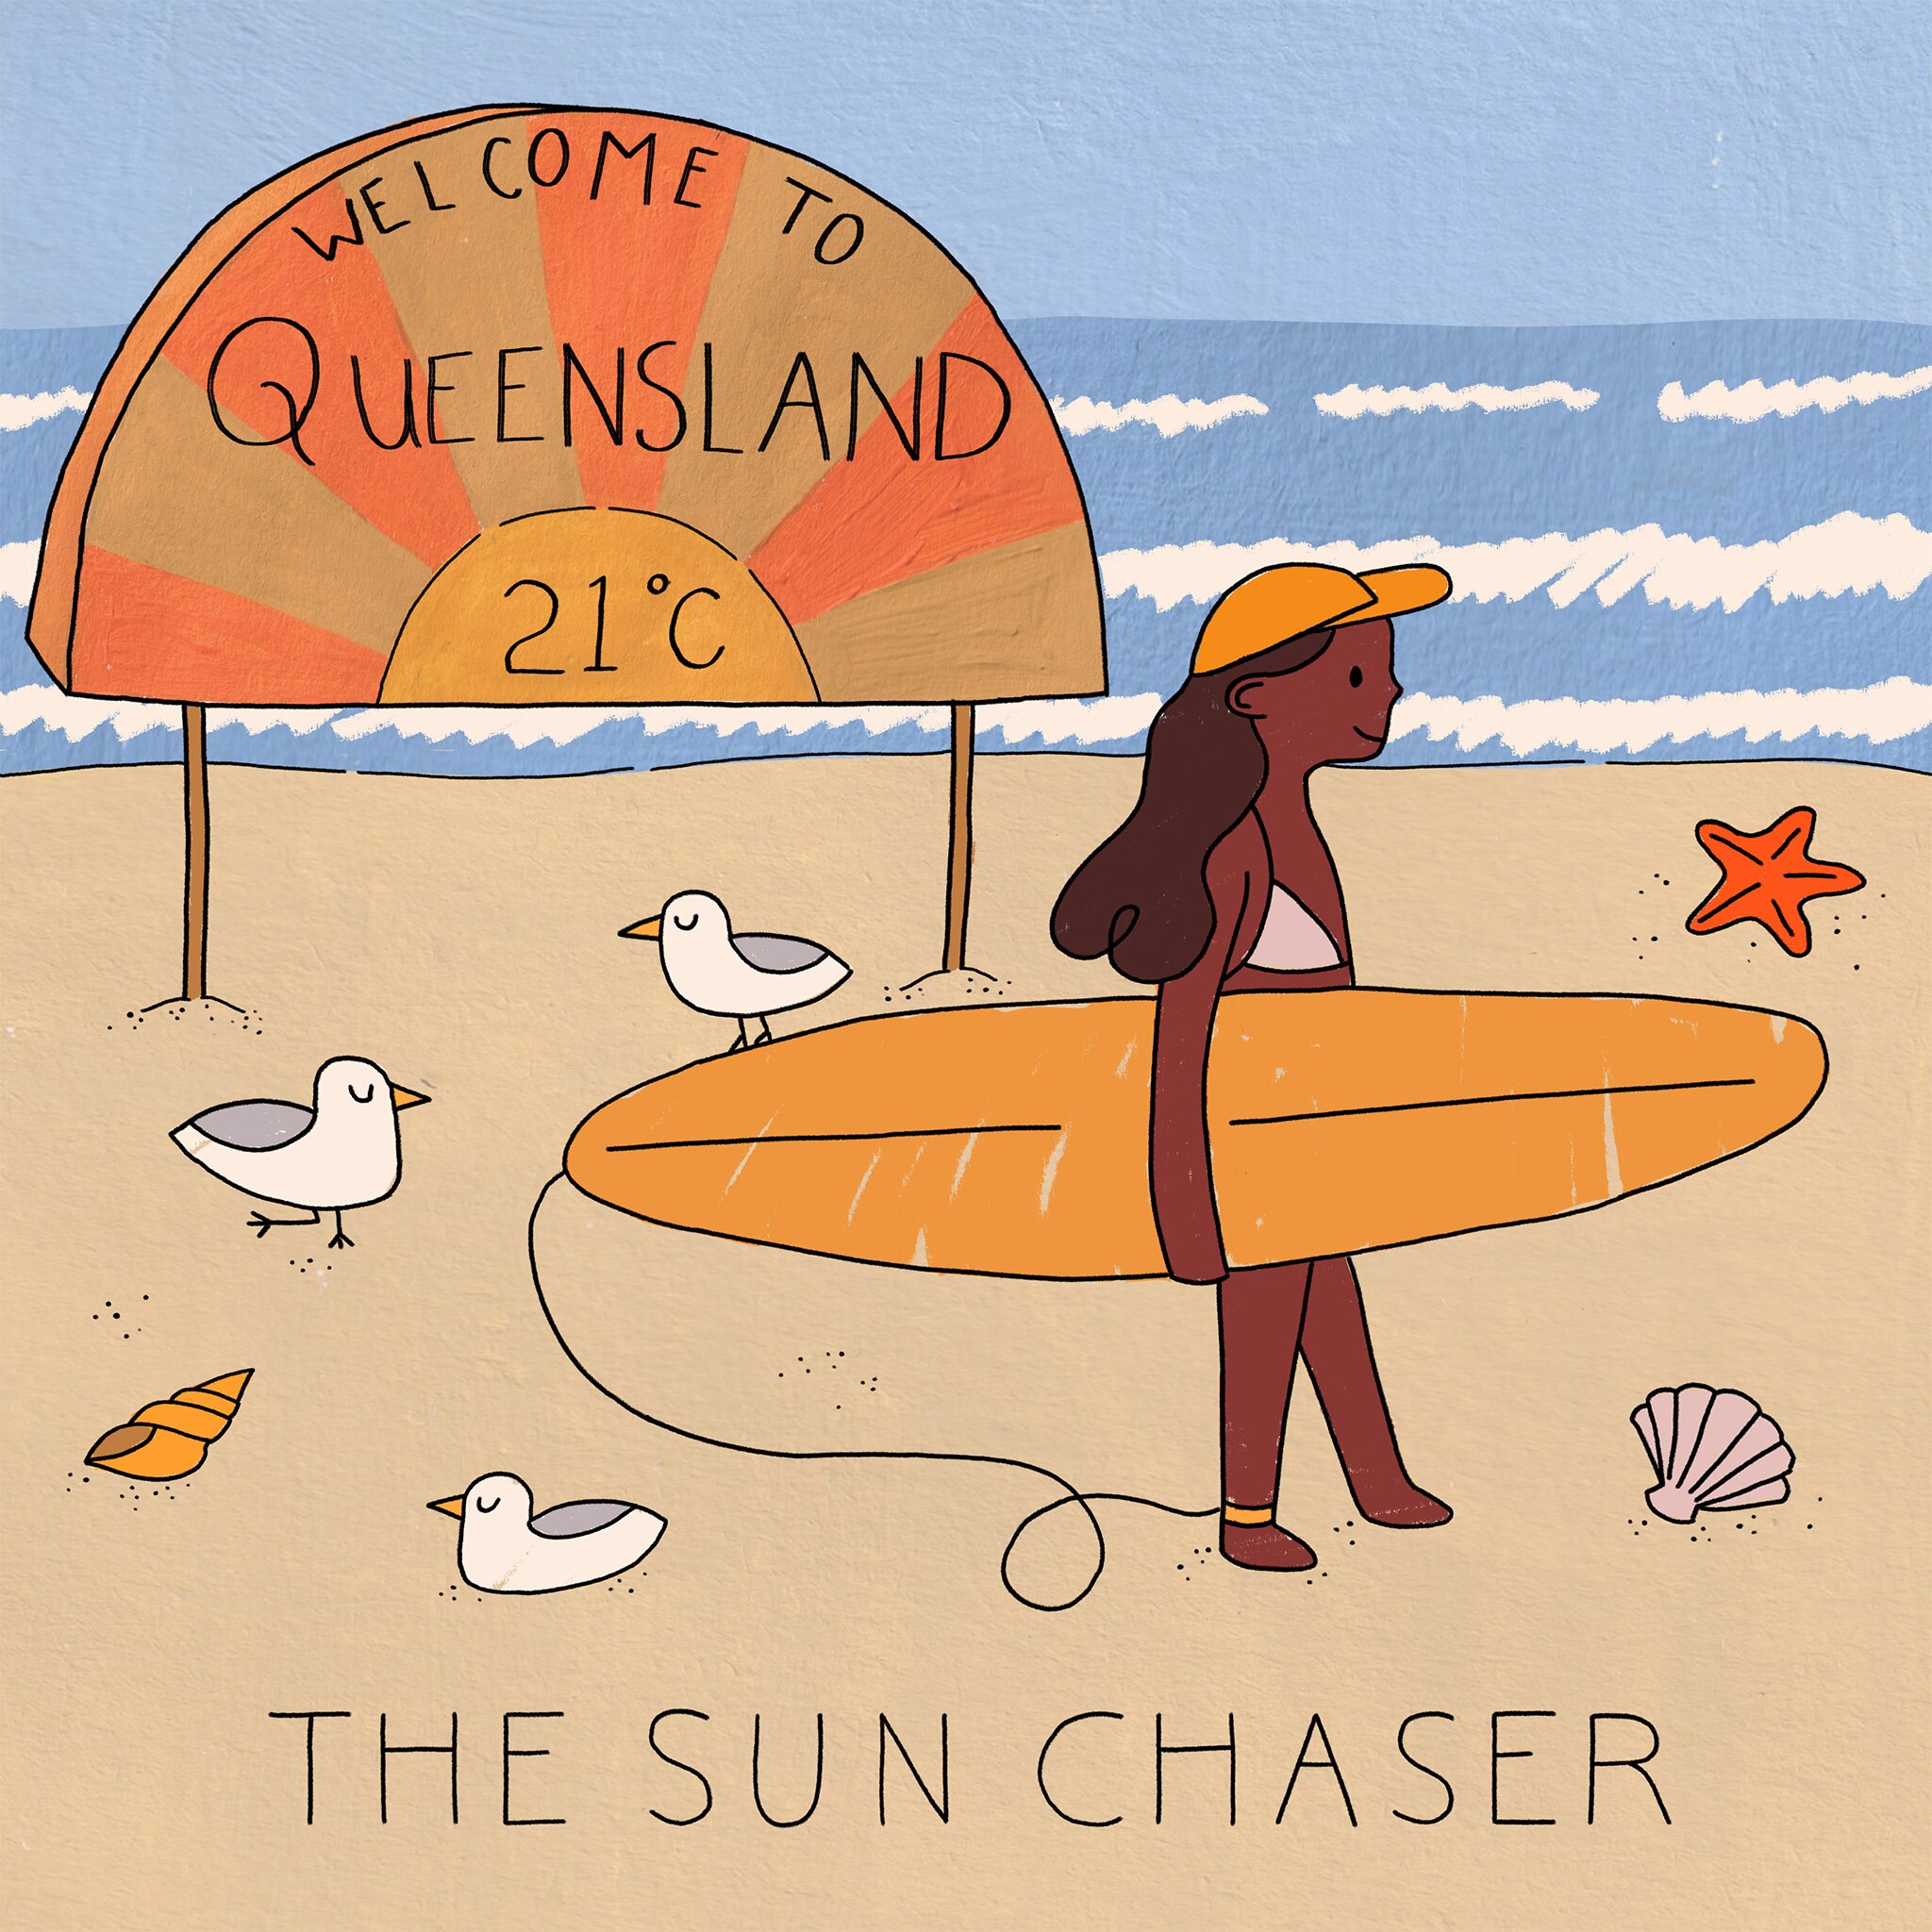 Woman holding a surfboard on a beach in Queensland. Text: The Sun Chaser